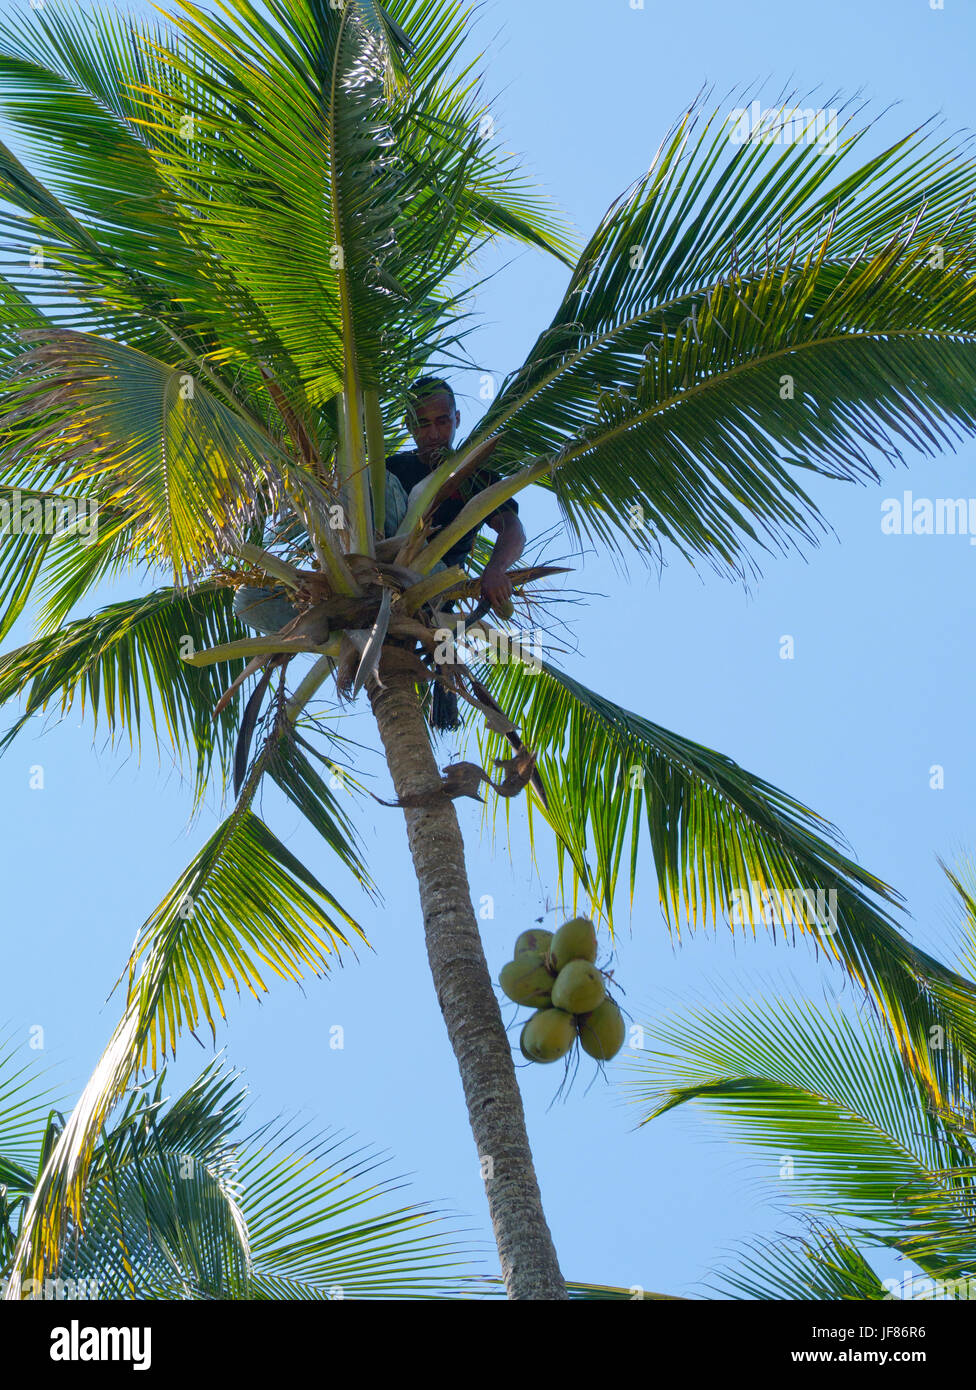 Coconuts being harvested in Colombia by man with knife up palm tree, coconuts in mid-air Stock Photo